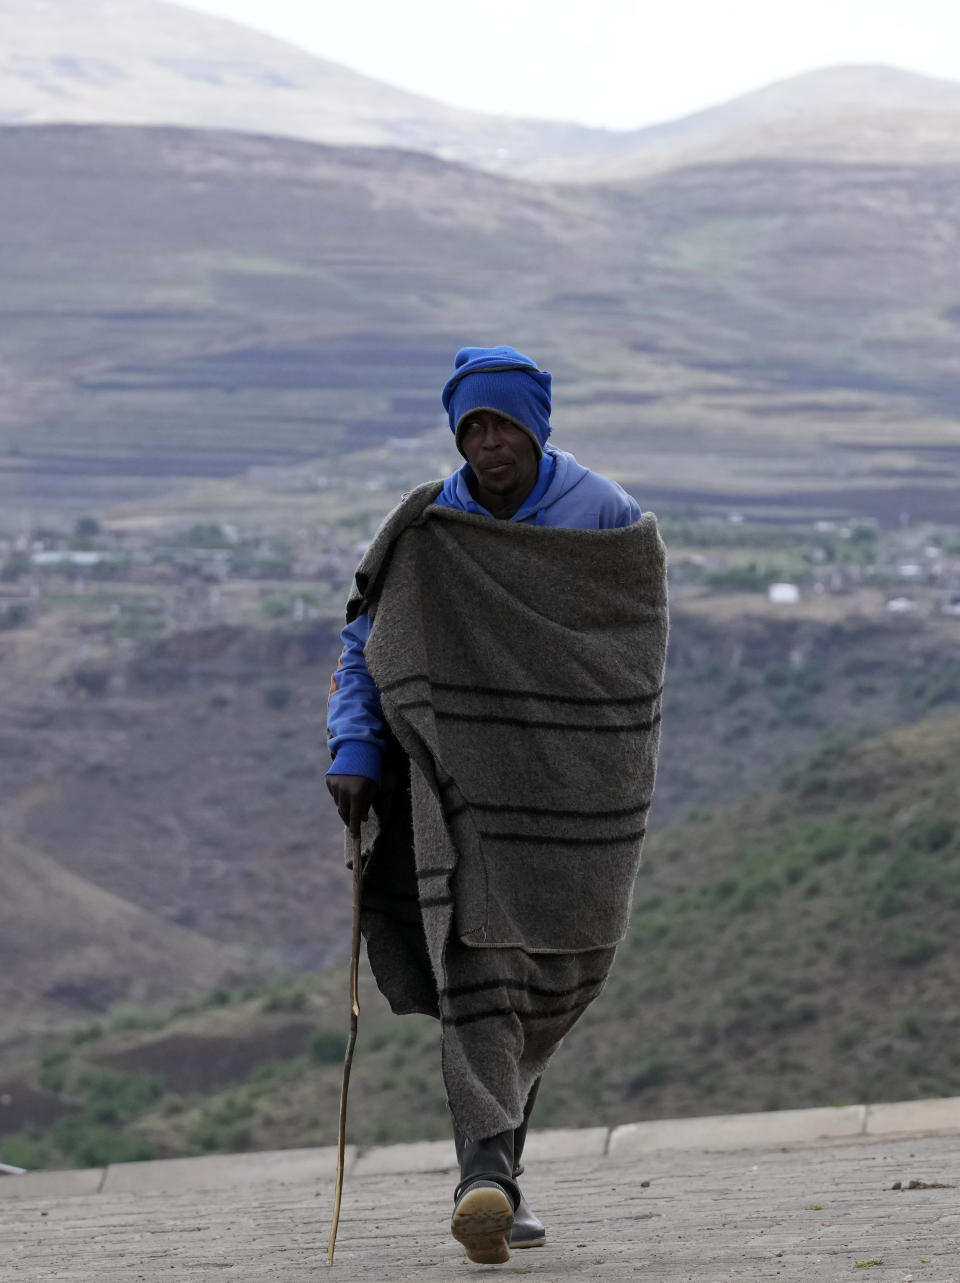 A man covered with a blanket leaves the voting station after casting his vote at a polling station in Thaba-Tseka District, 82km east of Maseru, Lesotho, Friday, Oct. 7, 2022. Voters across Lesotho are heading to the polls Friday to elect a leader to find solutions to high unemployment and crime. (AP Photo/Themba Hadebe)